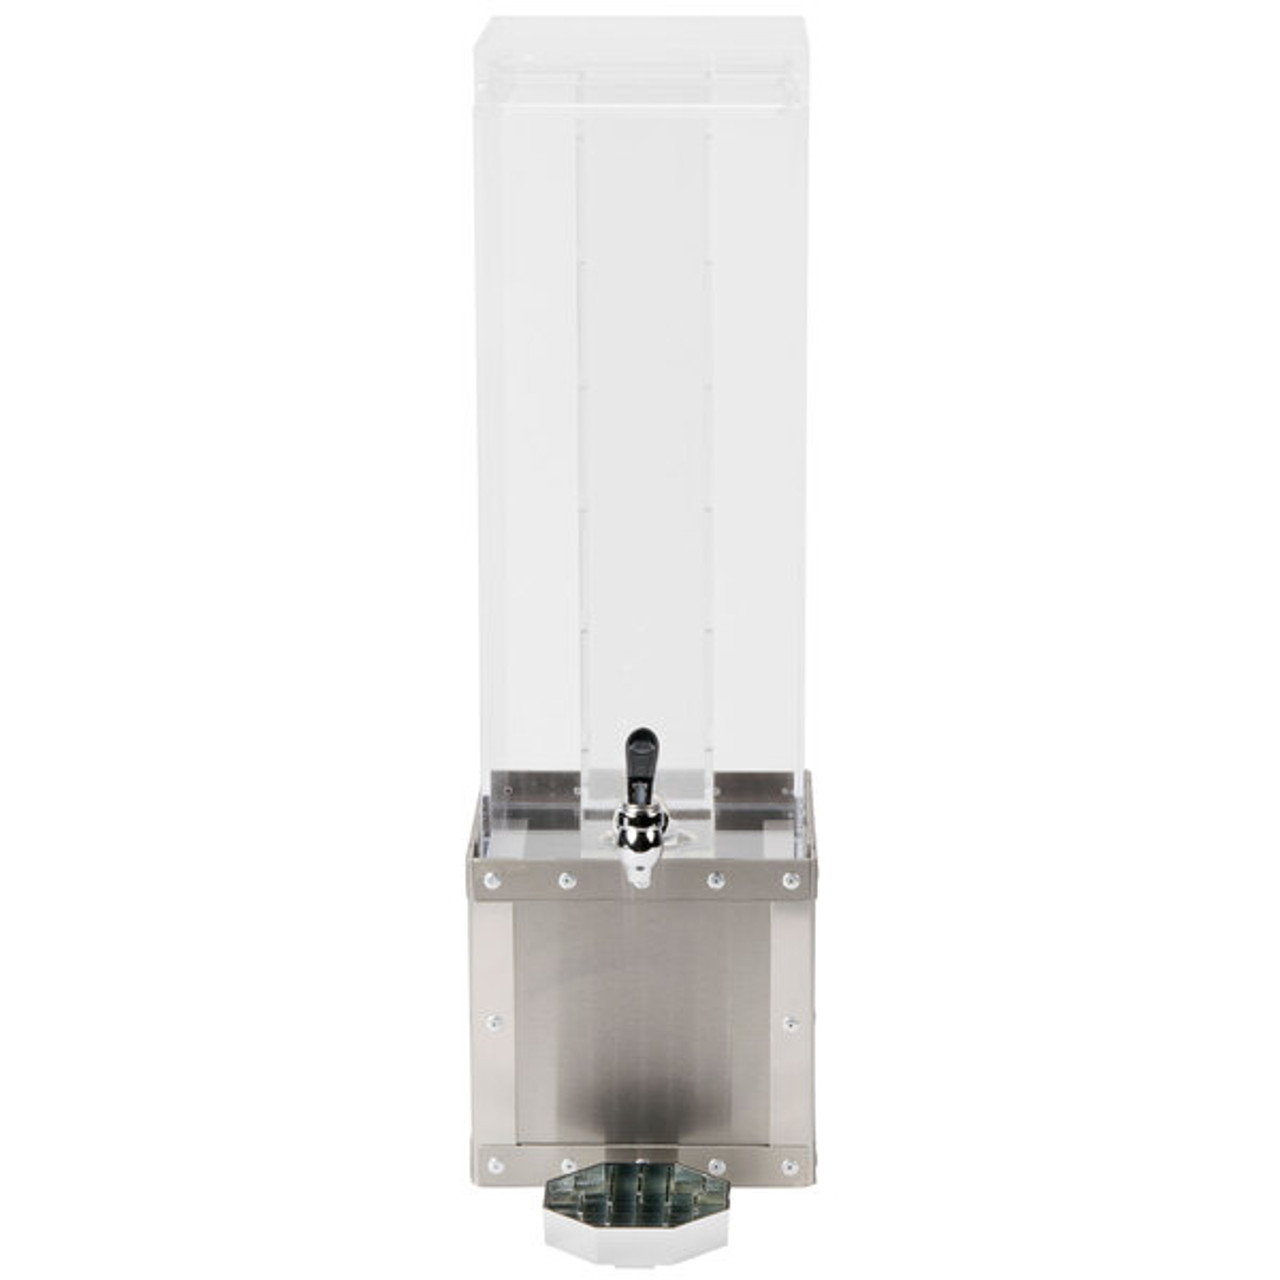 Cal-Mil 3 gal Beverage Dispenser w/ Ice Tube - Plastic Container, Stainless Base - Chicken Pieces